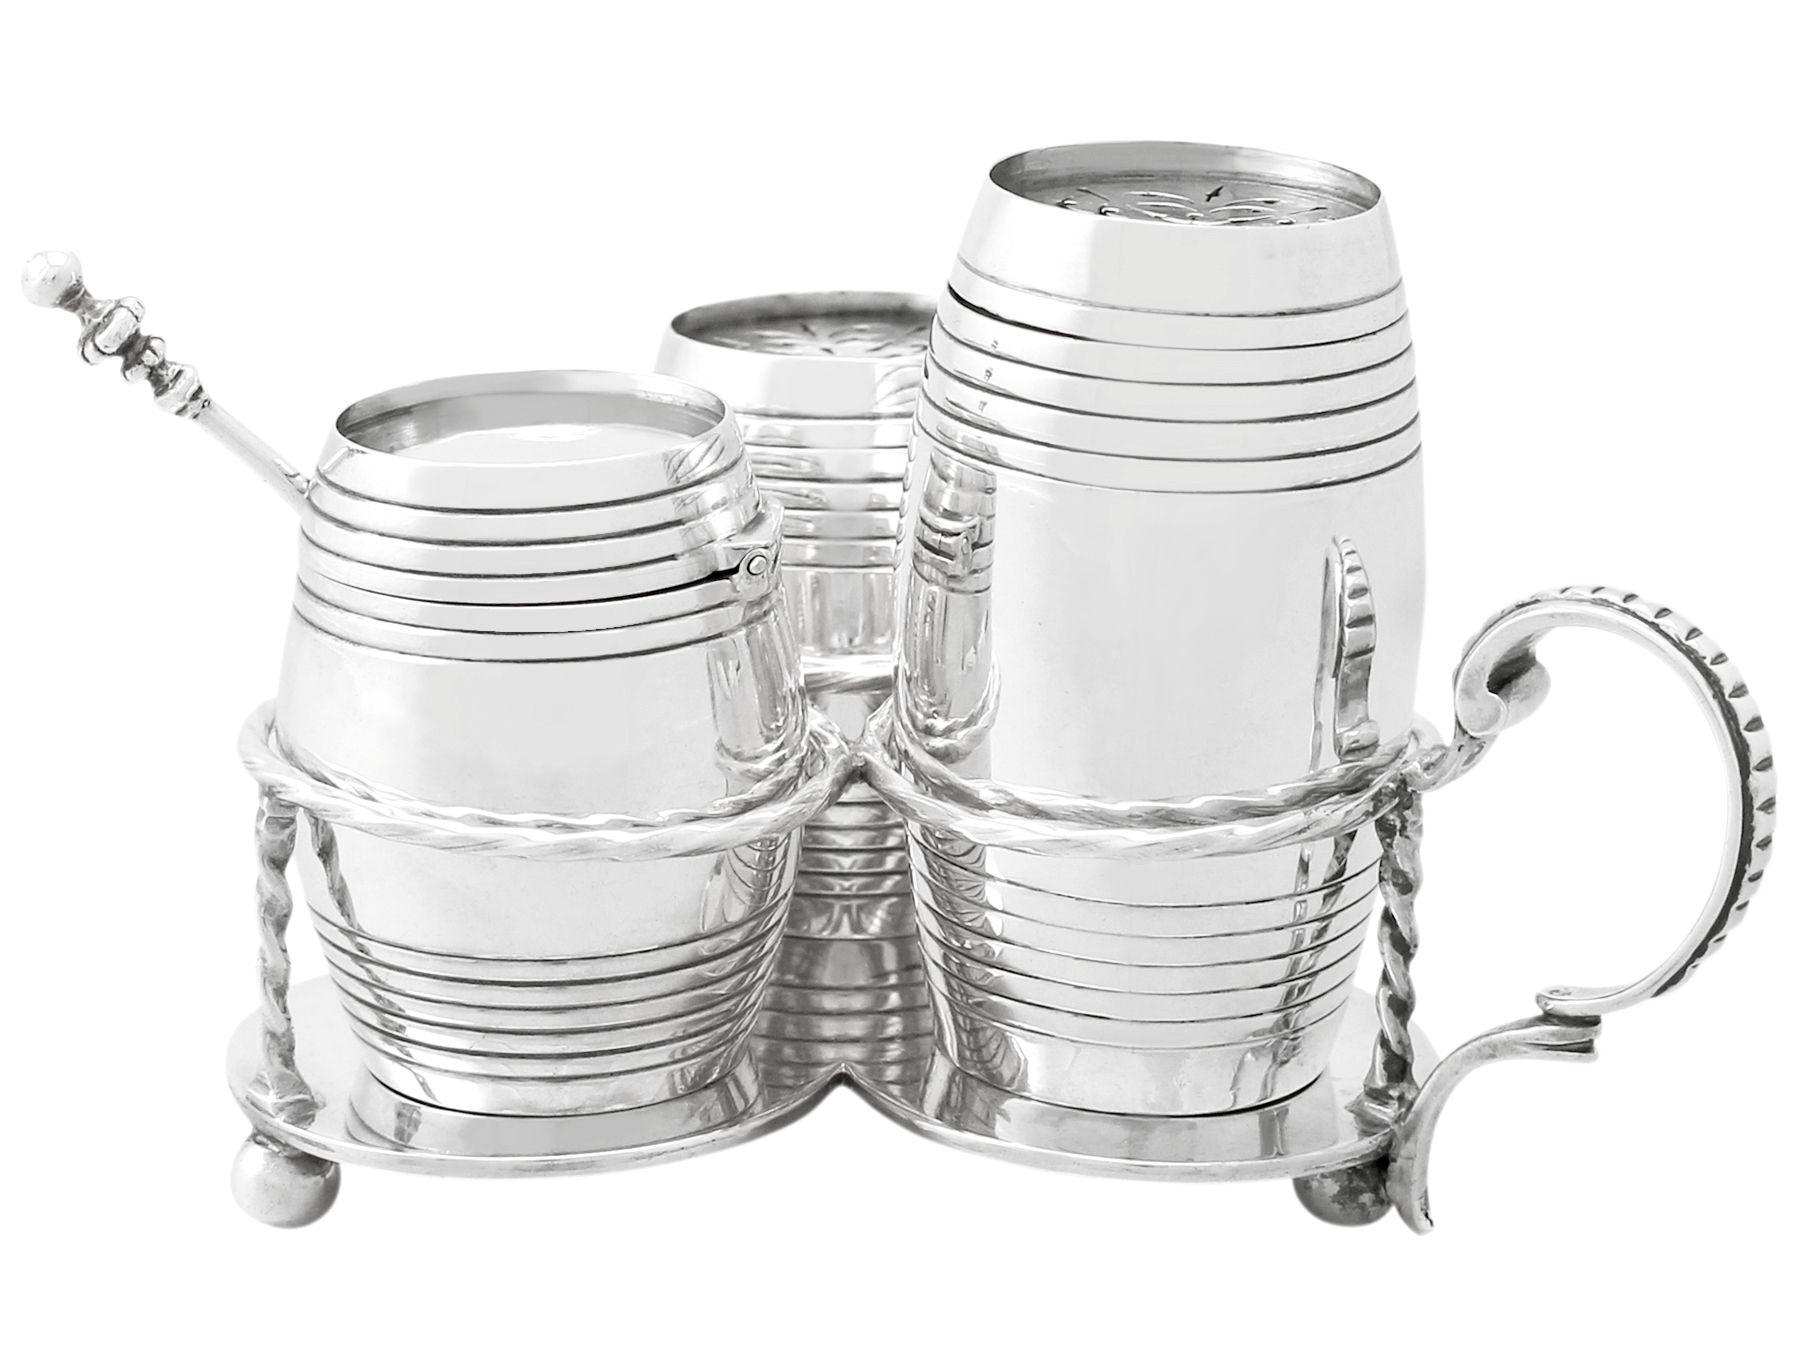 A fine, impressive and collectable antique Victorian English sterling silver cruet set modelled in the form of barrels, part of our silverware collection.

The pieces of this impressive antique Victorian sterling silver cruet set have a barrel